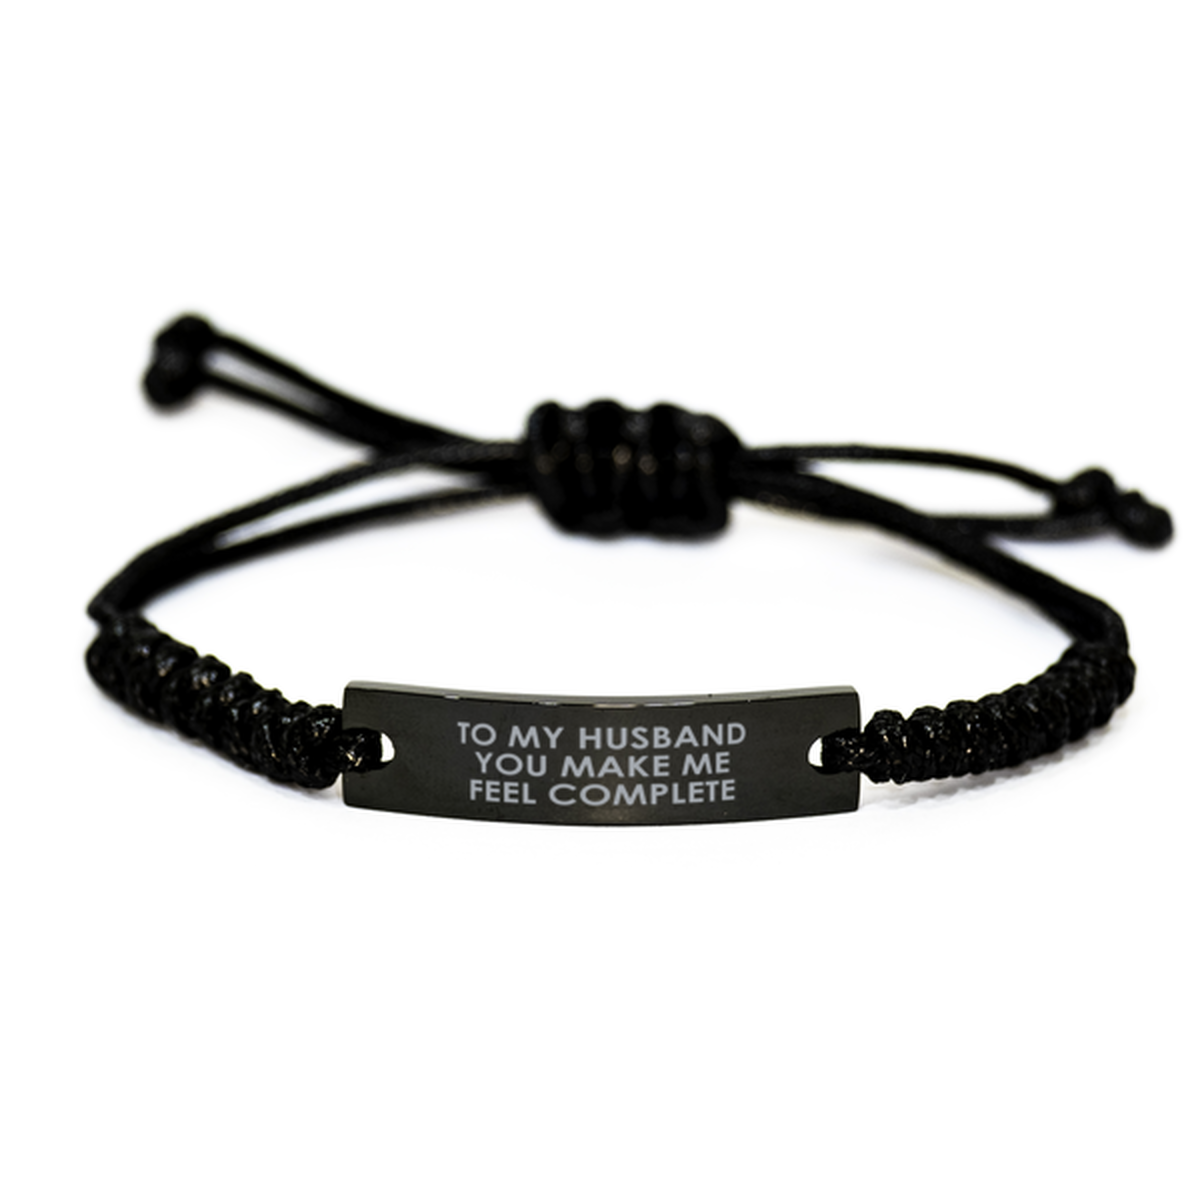 To My Husband Rope Bracelet, You Make Me Feel Complete, Valentines  Gifts For Husband From Wife, Birthday Gifts For Men